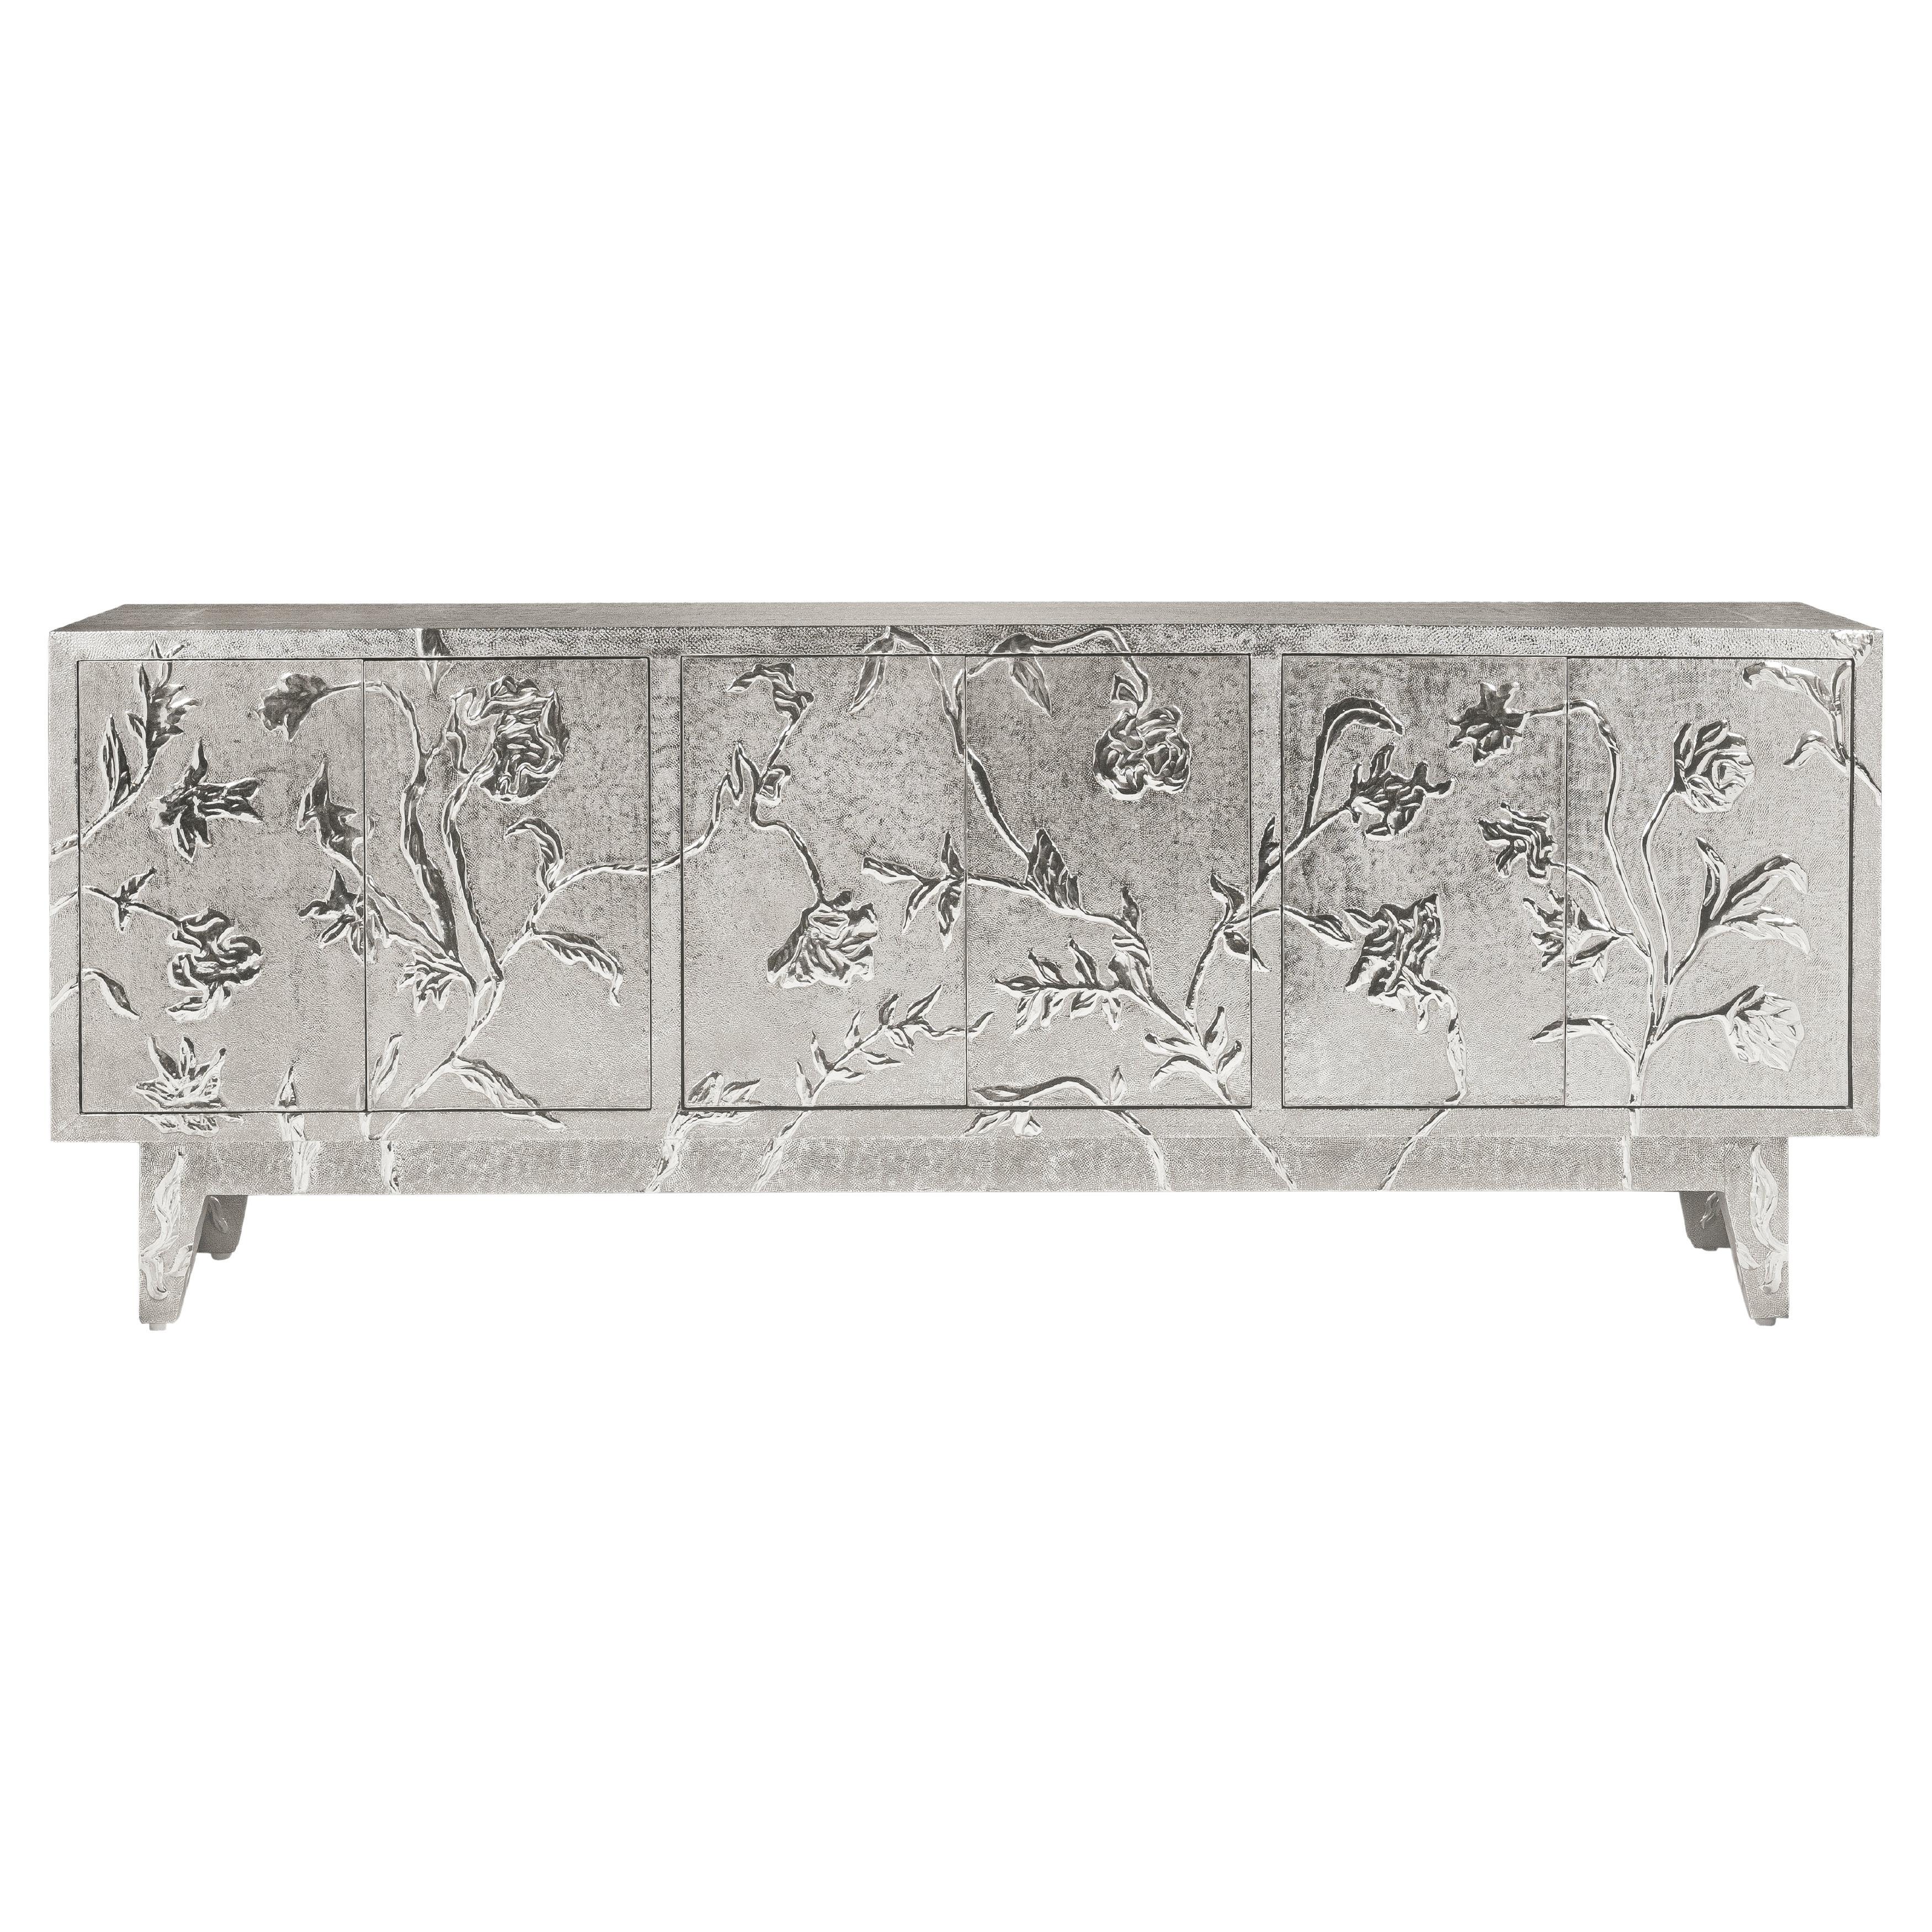 Art Deco Sideboard in Floral Design by Stephanie Odegard For Sale